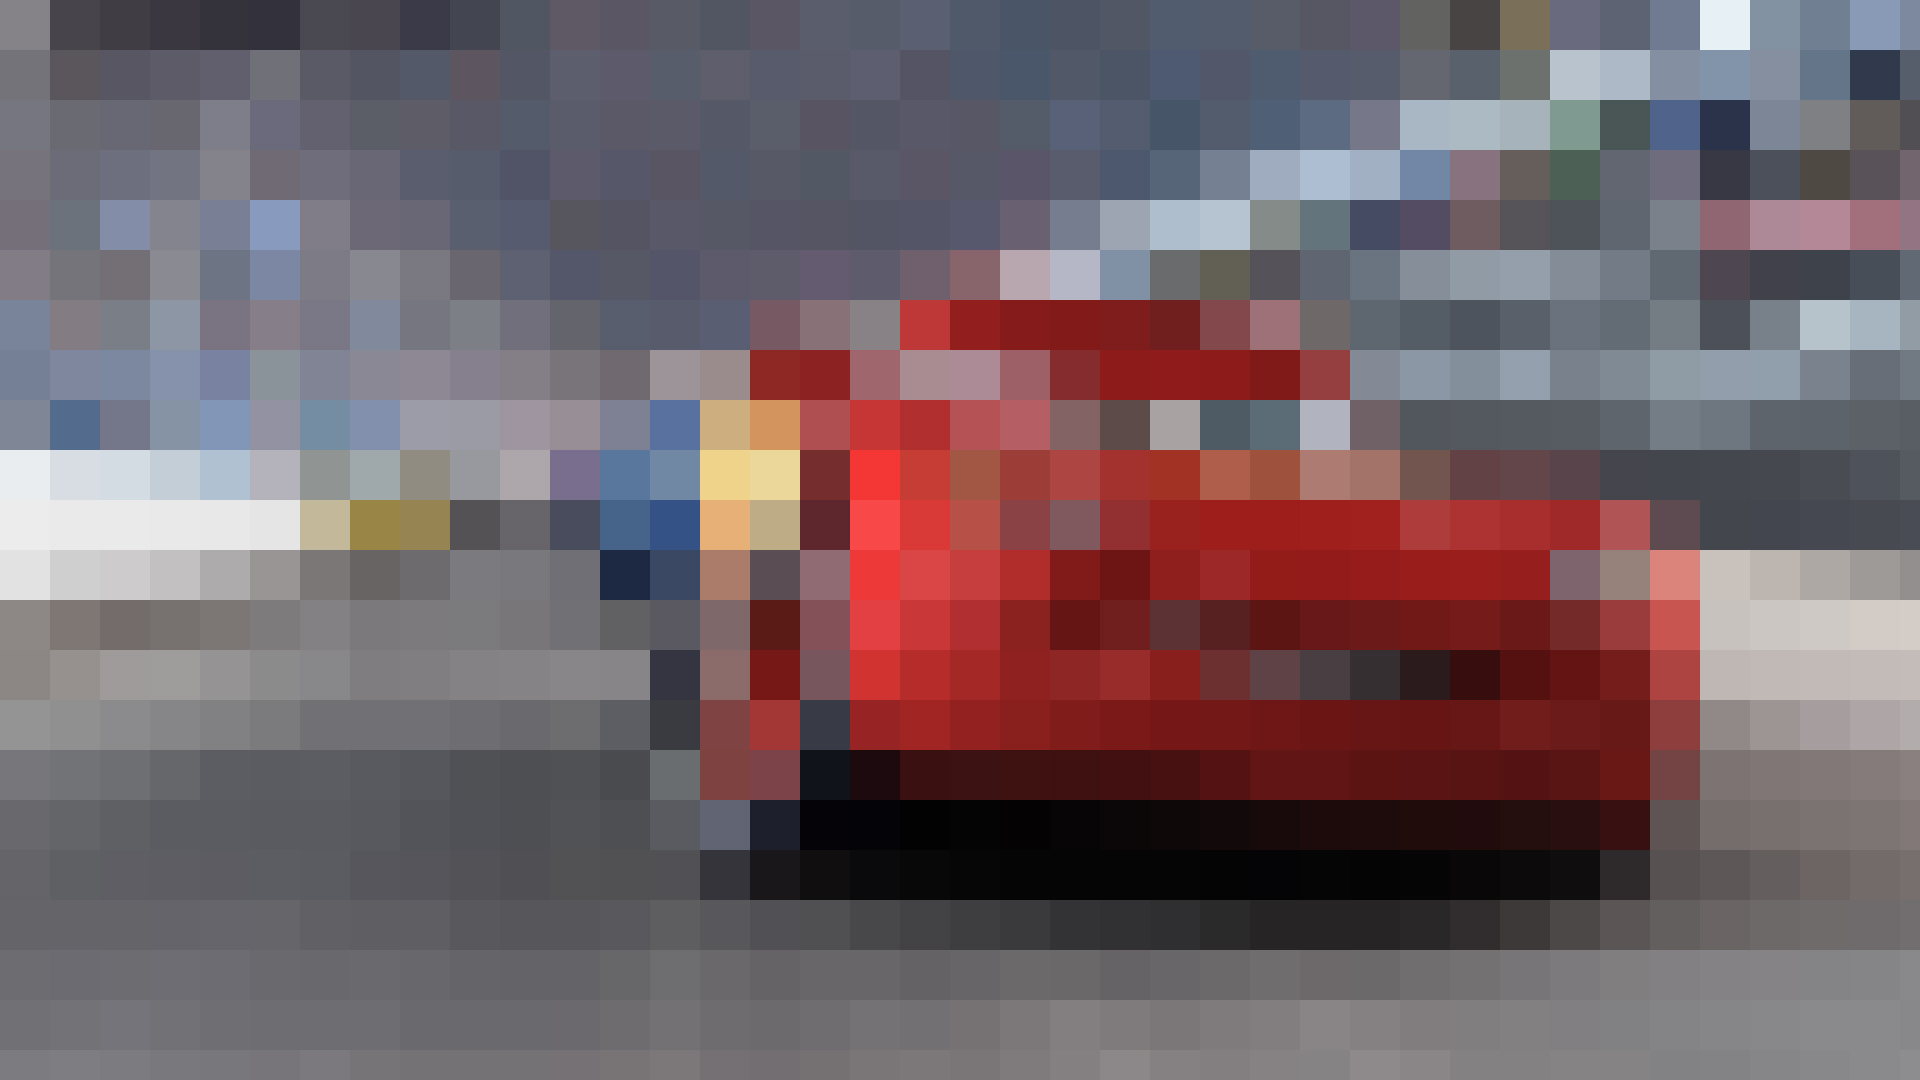 A blurred image of something red